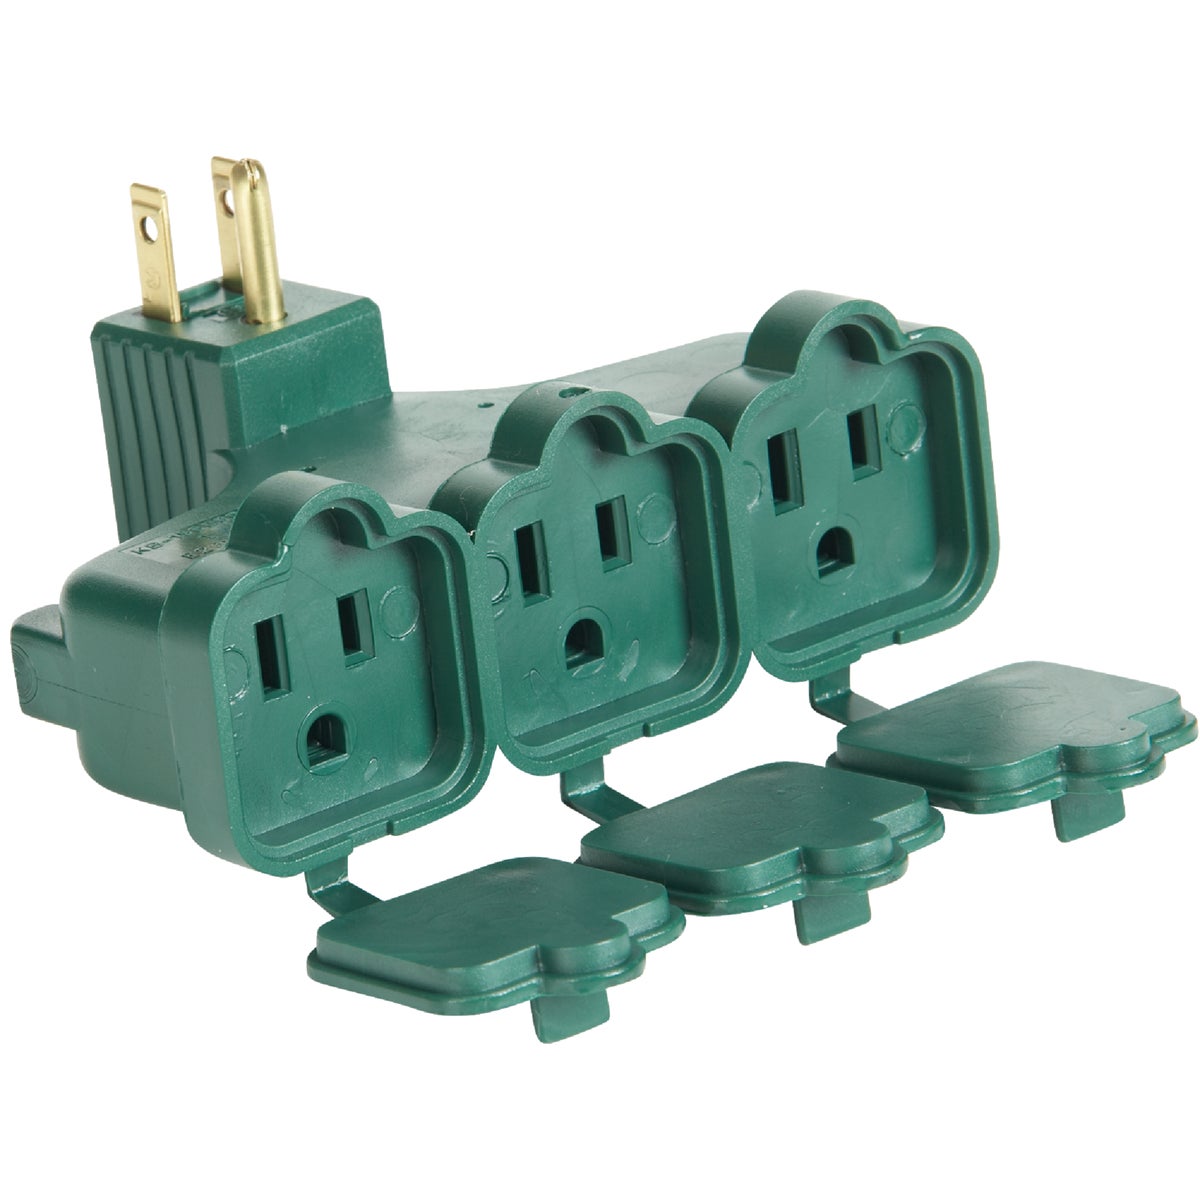 Item 505412, 3-outlet, 3-conductor outlet tap with rain tight safety covers.